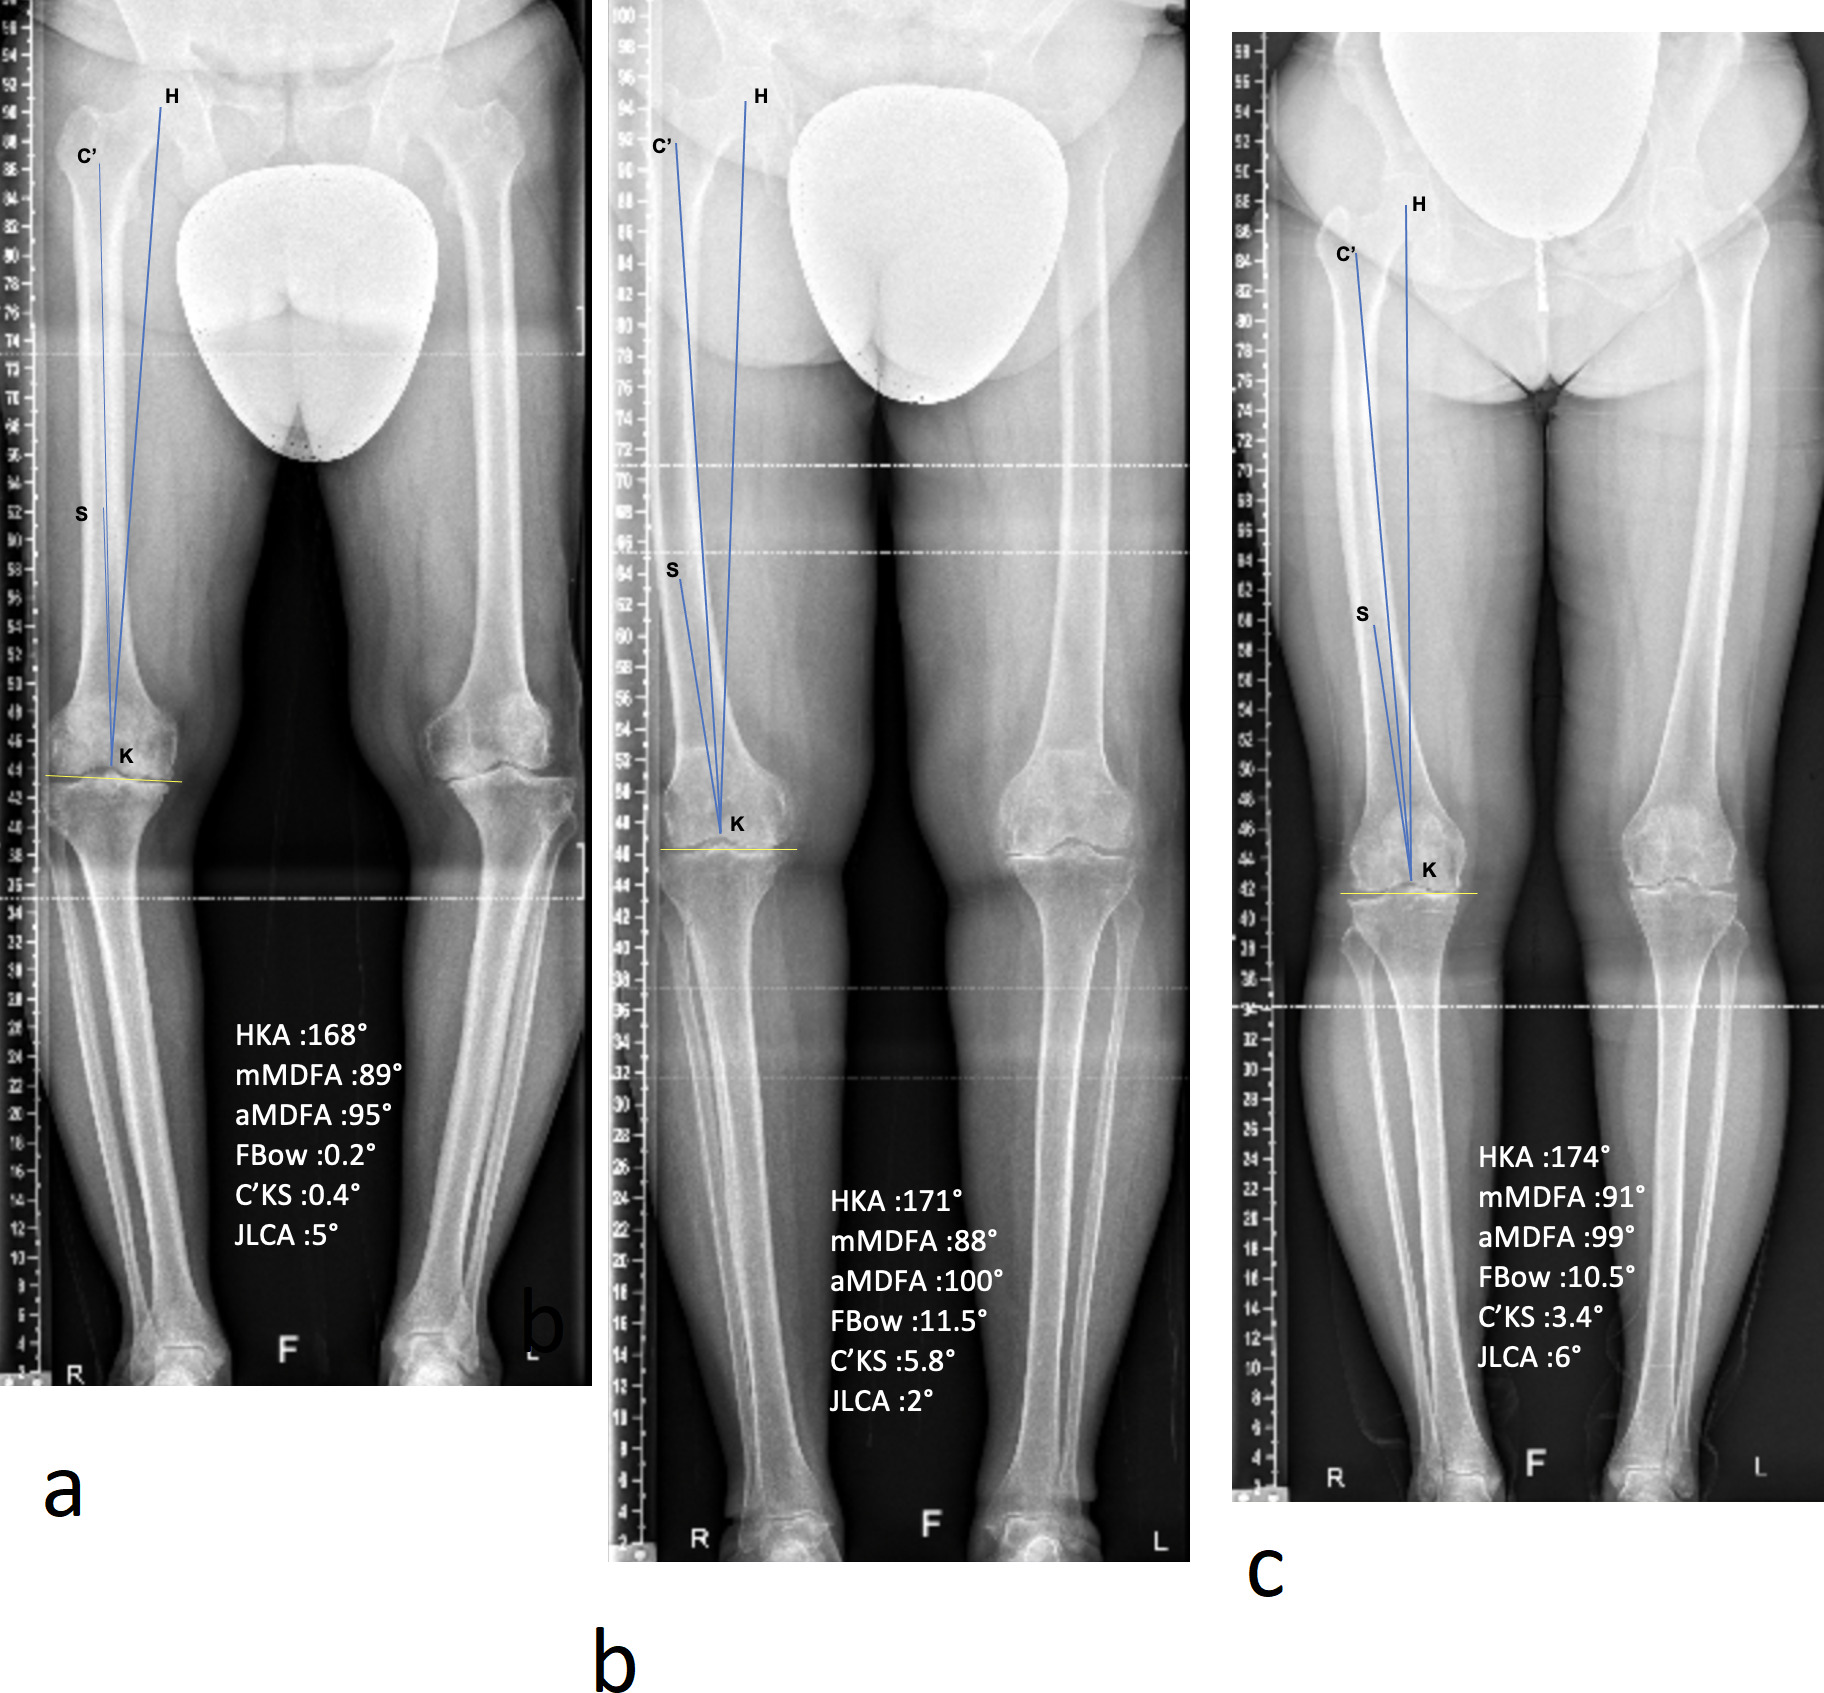 Fig. 6 
            Three full long-leg radiograph showing examples of femoral deformity. a) Right knee with a distal metaphyseal varus deformity and without diaphyseal deformity. b) Right knee with a diaphyseal varus deformity (middle of the shaft) and a high FBow impact on the knee alignment (5.8°). c) Right knee with a diaphyseal varus deformity (proximal part of the shaft). While the FBow angle was similar to the Figure 5b, the FBow impact on the knee was low because the deformity was far away from the knee. aMDFA, anatomical medial distal femoral angle; FBow, femoral bowing angle; HKA, hip-knee-ankle angle; JLCA, joint line convergence angle; mMDFA, mechanical medial distal femoral angle; MPTA, medial proximal tibial angle.
          